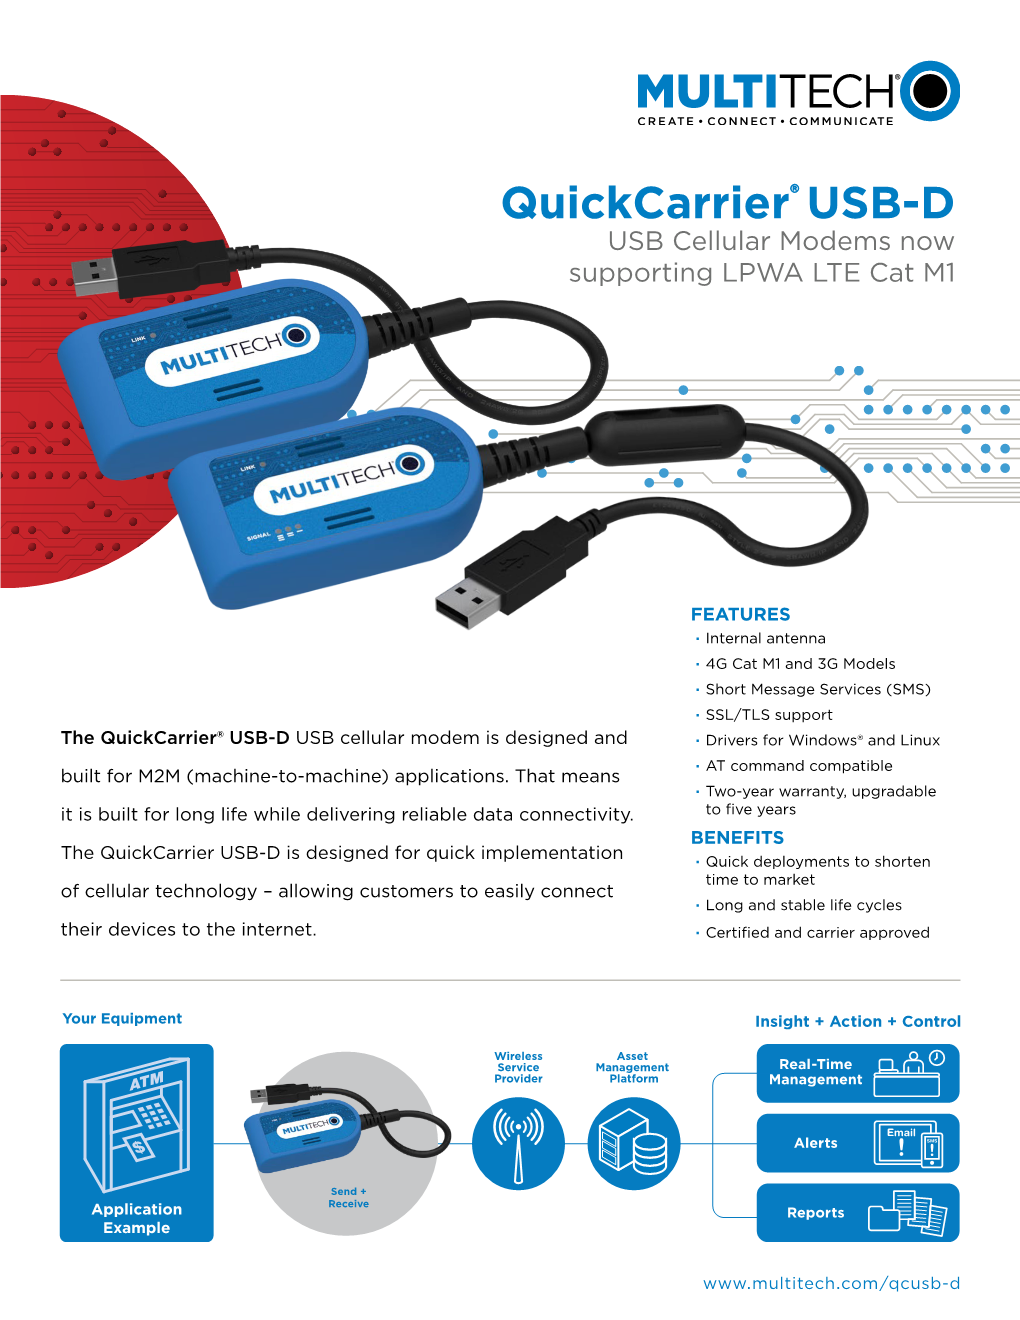 Quickcarrier® USB-D USB Cellular Modems Now Supporting LPWA LTE Cat M1